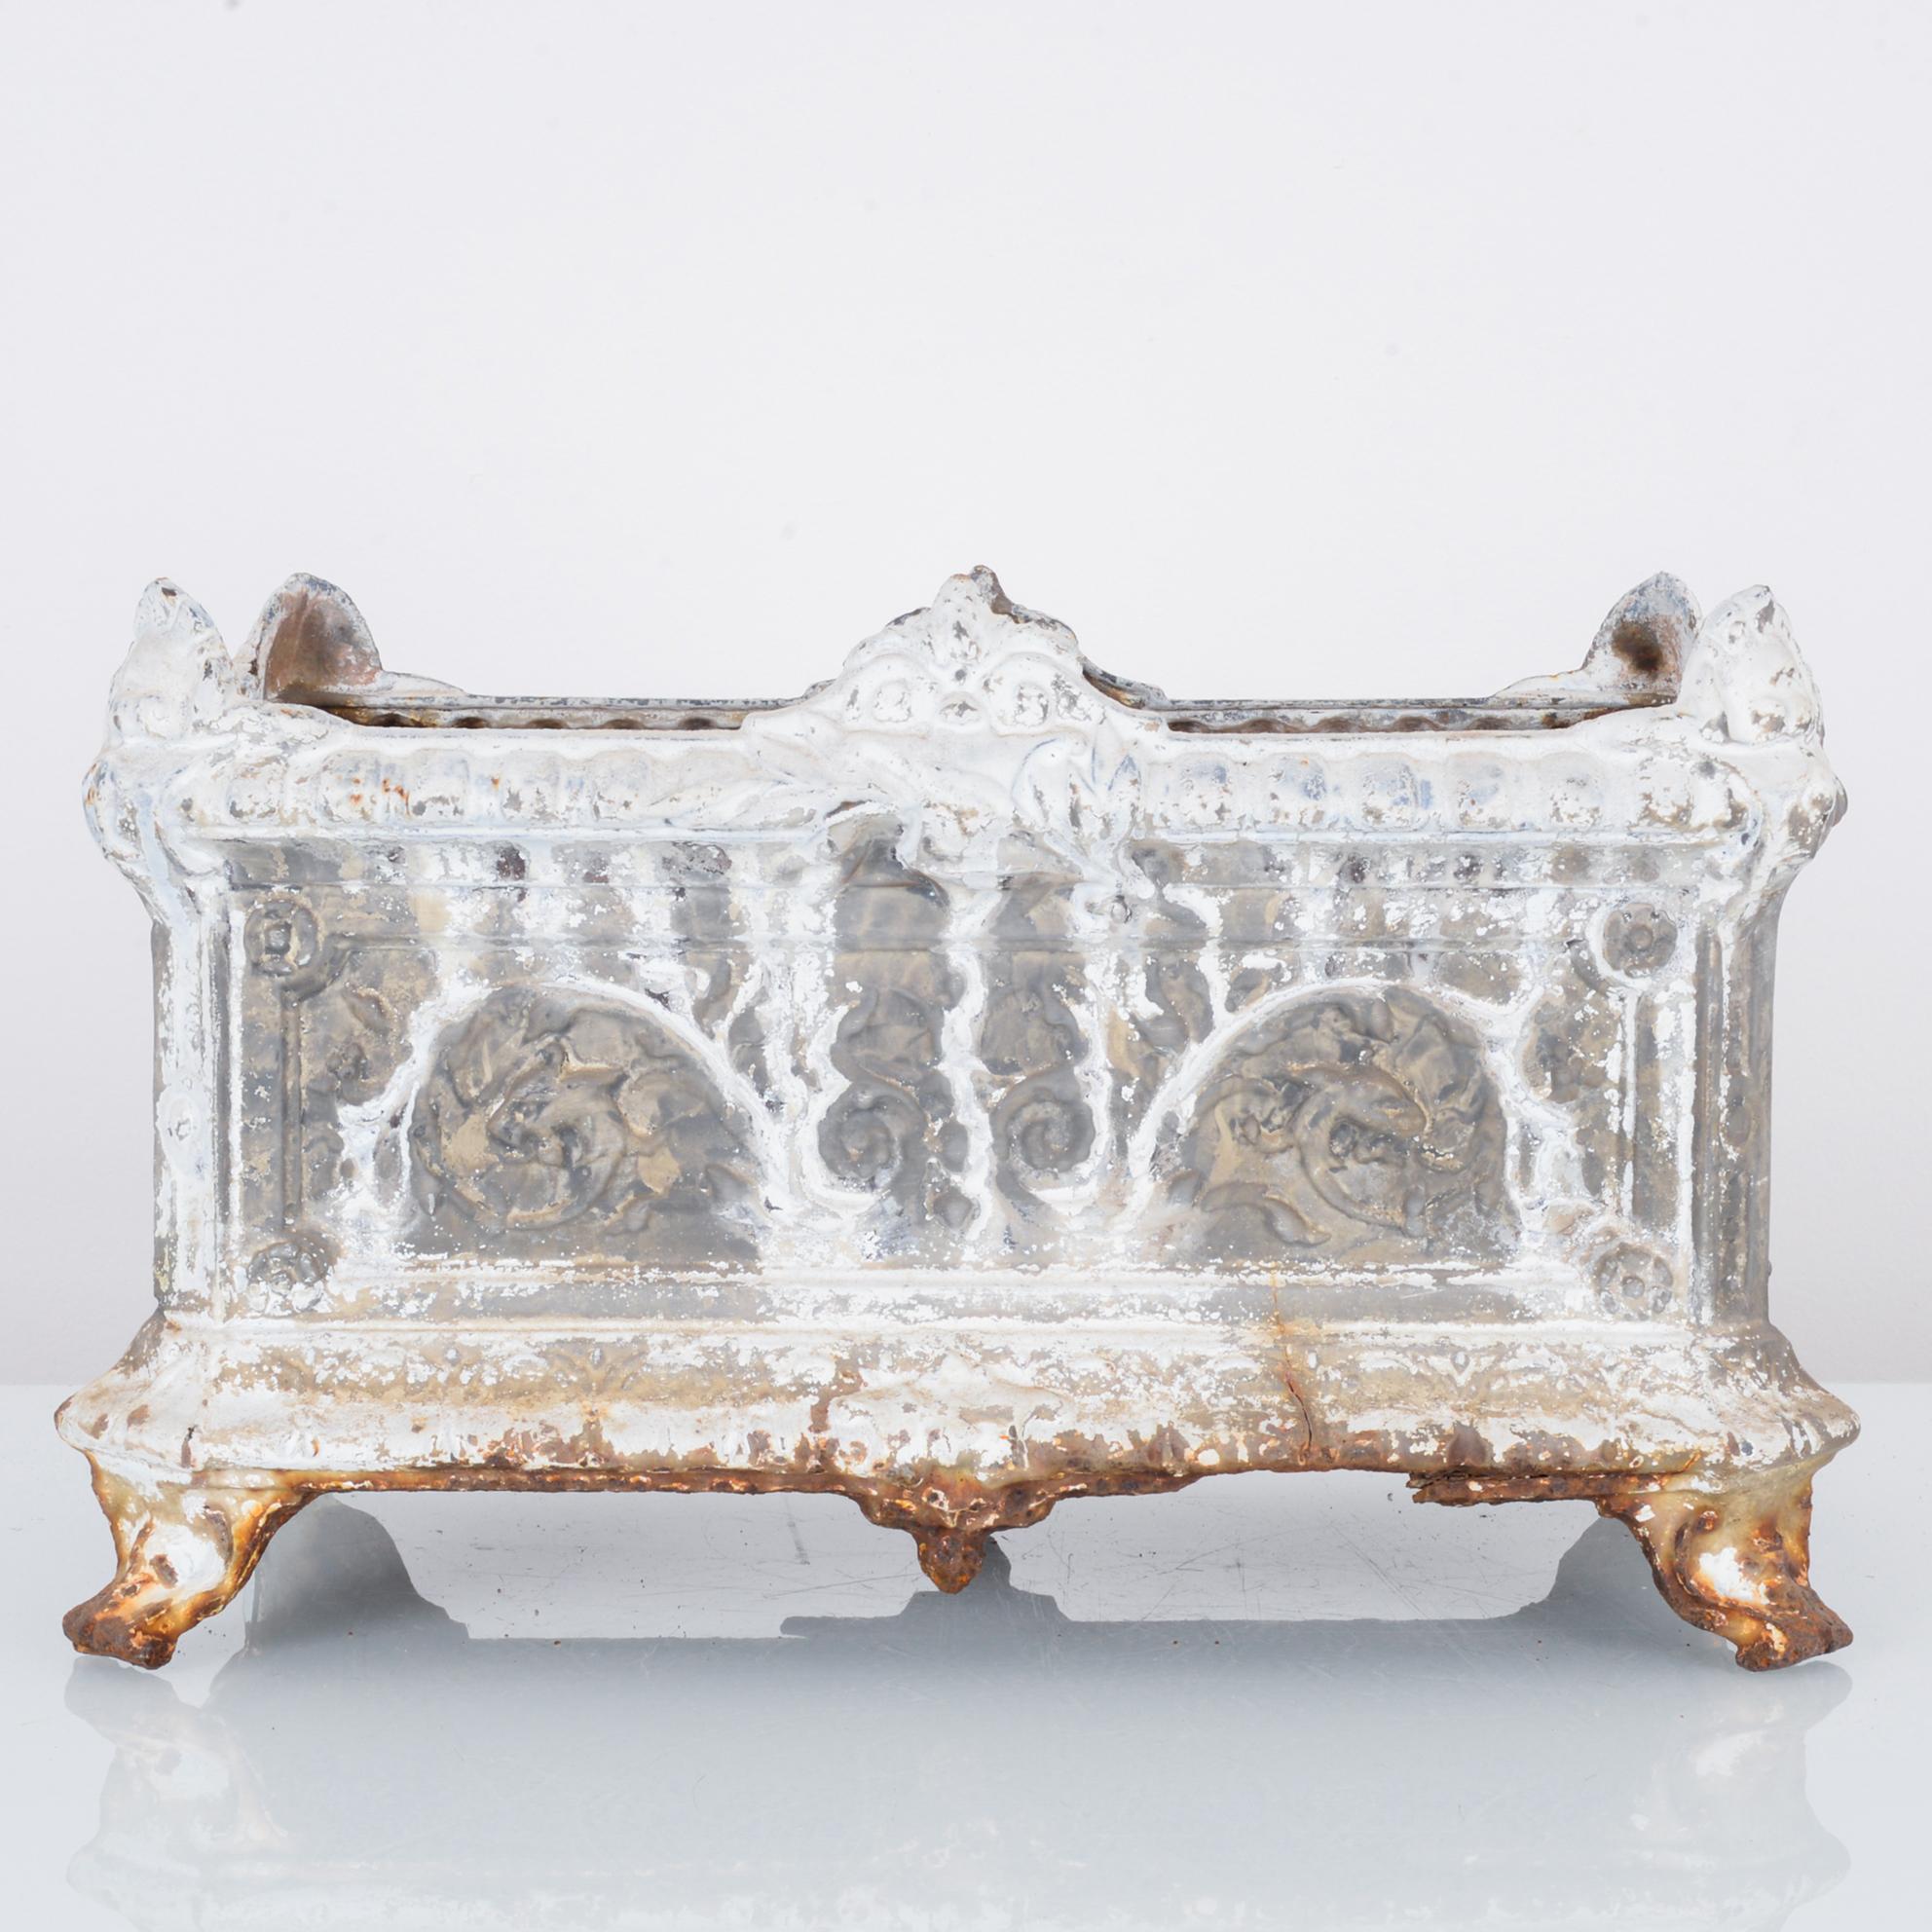 This cast iron planter was made in France, circa 1920. Raised on scroll feet, the planter features elaborate molding and floral motifs, making it a charming Rococo Revival piece. The distressed white paint complements the sheen of the cast iron in